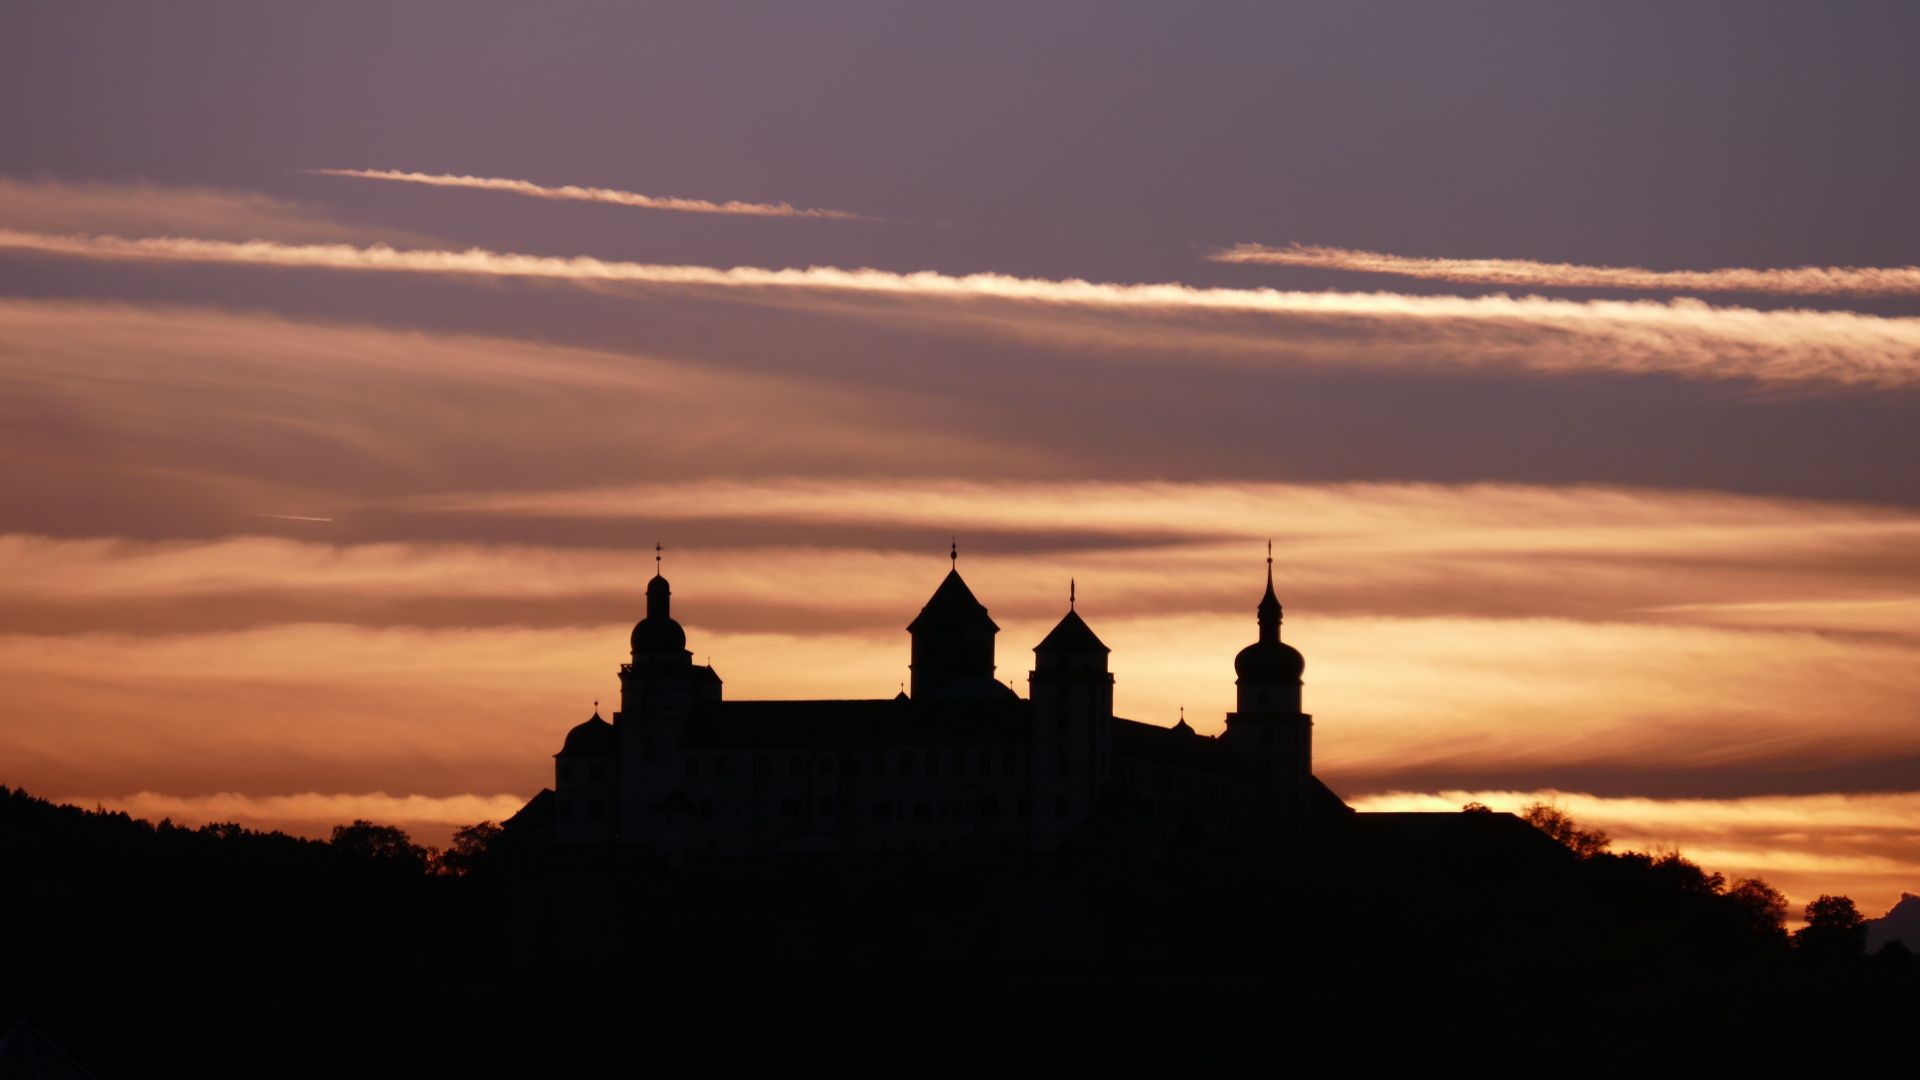 Architecture Castle Nature Landscape Trees Germany Fortress Tower Silhouette Clouds Sunset 1920x1080